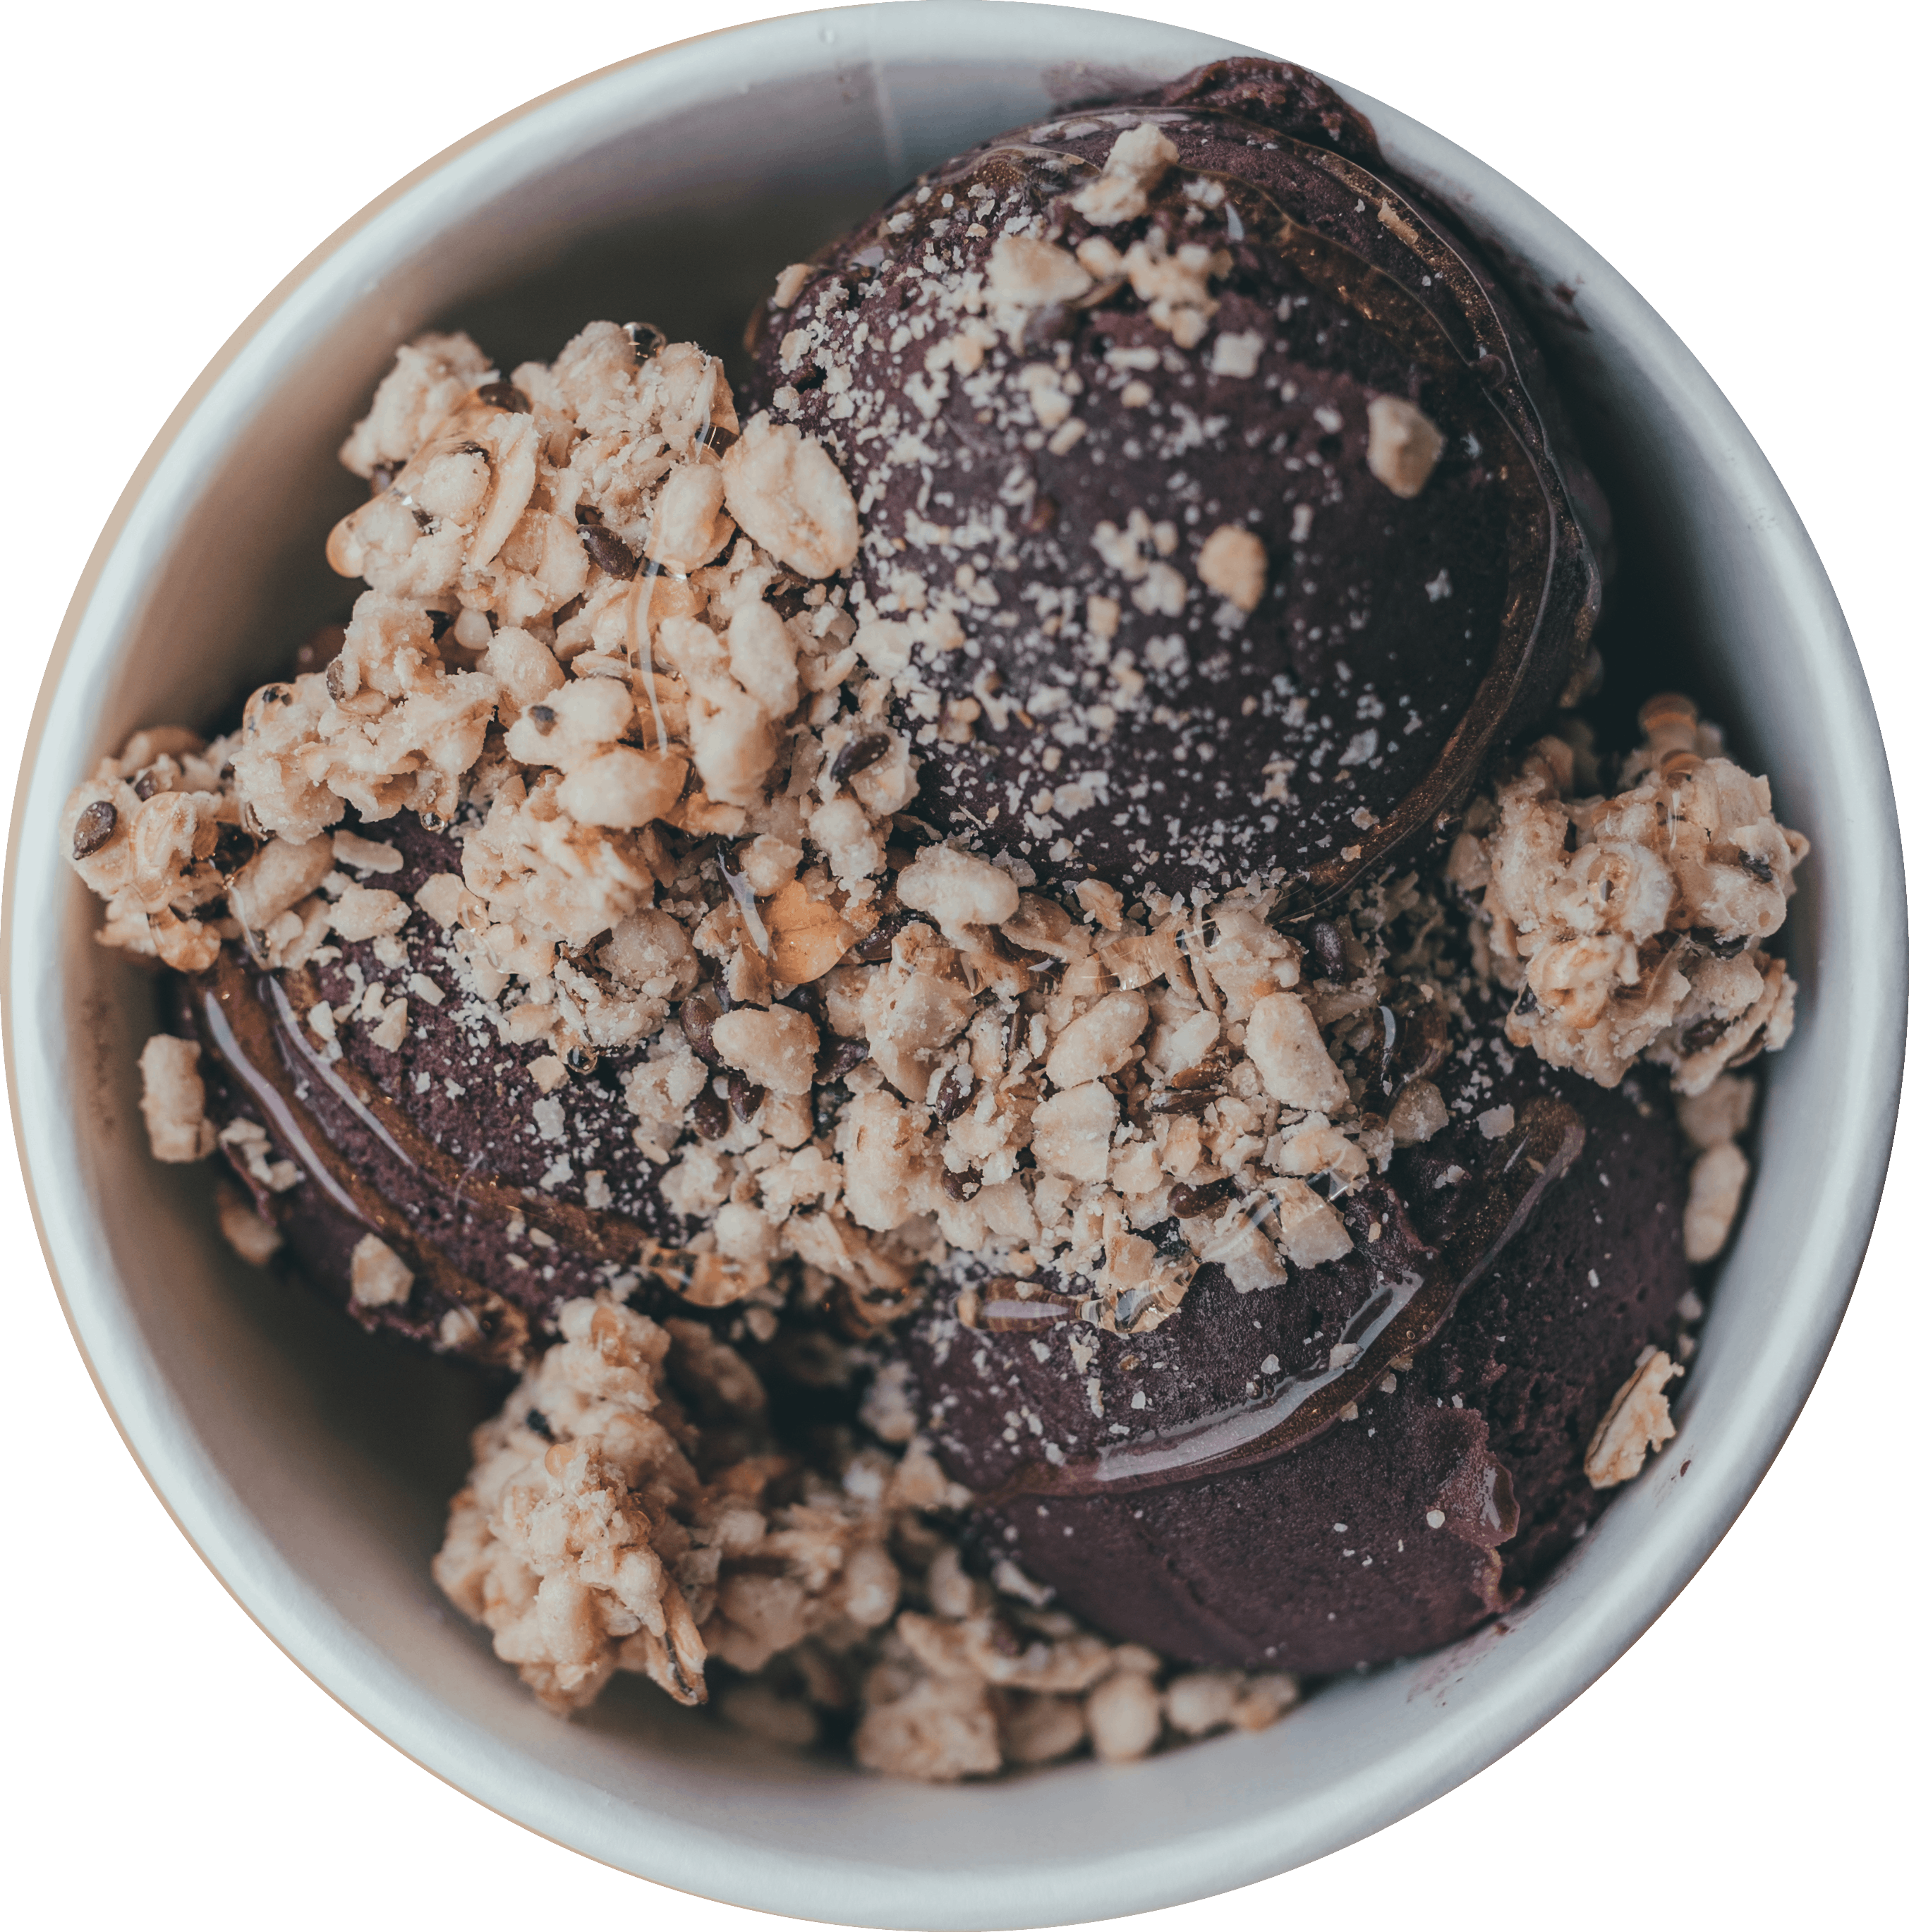 Brazilian Acai Bowl from Blended in Madison, WI